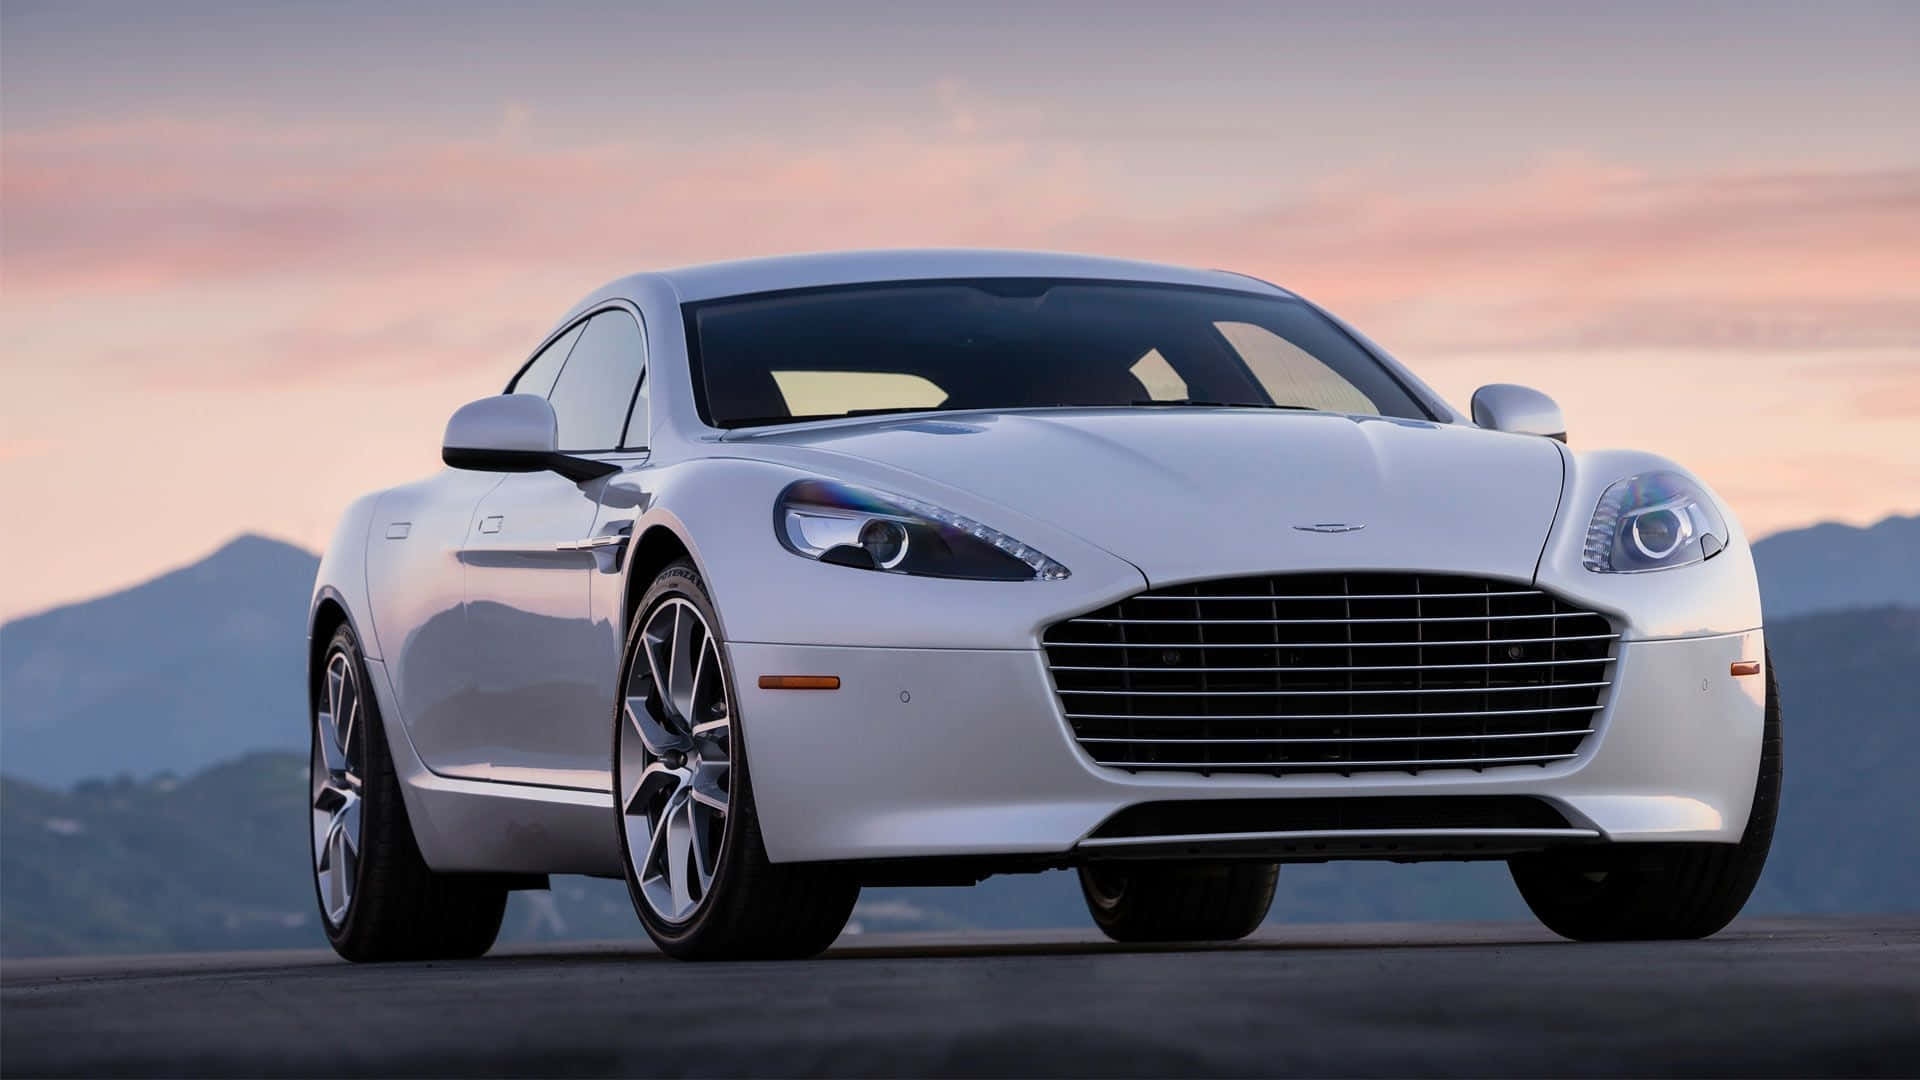 The Iconic Aston Martin Rapide S in Action Wallpaper